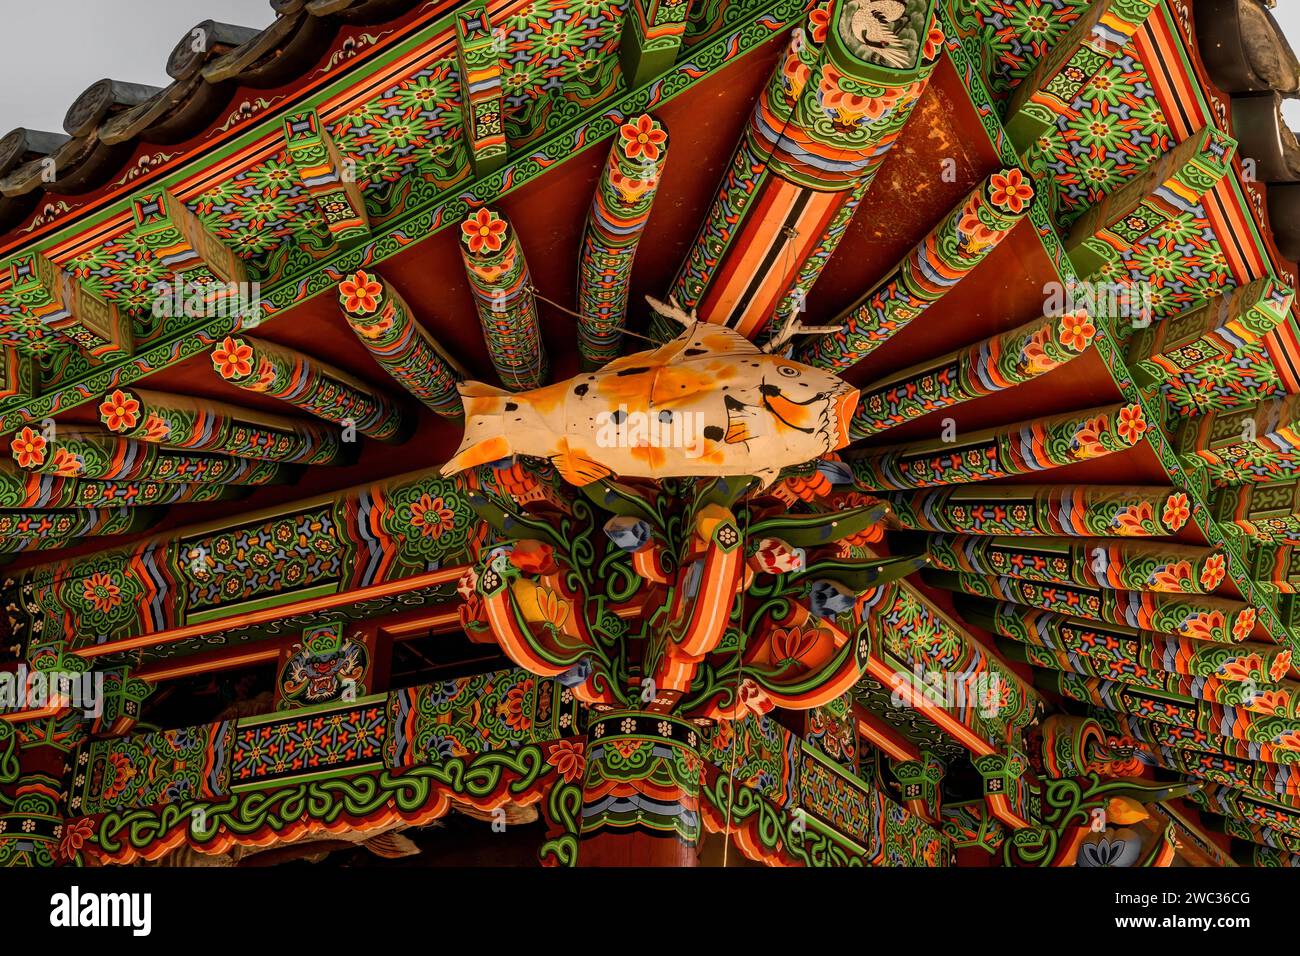 Wooden fish hanging from eves of colorful Buddhist pavilion Stock Photo